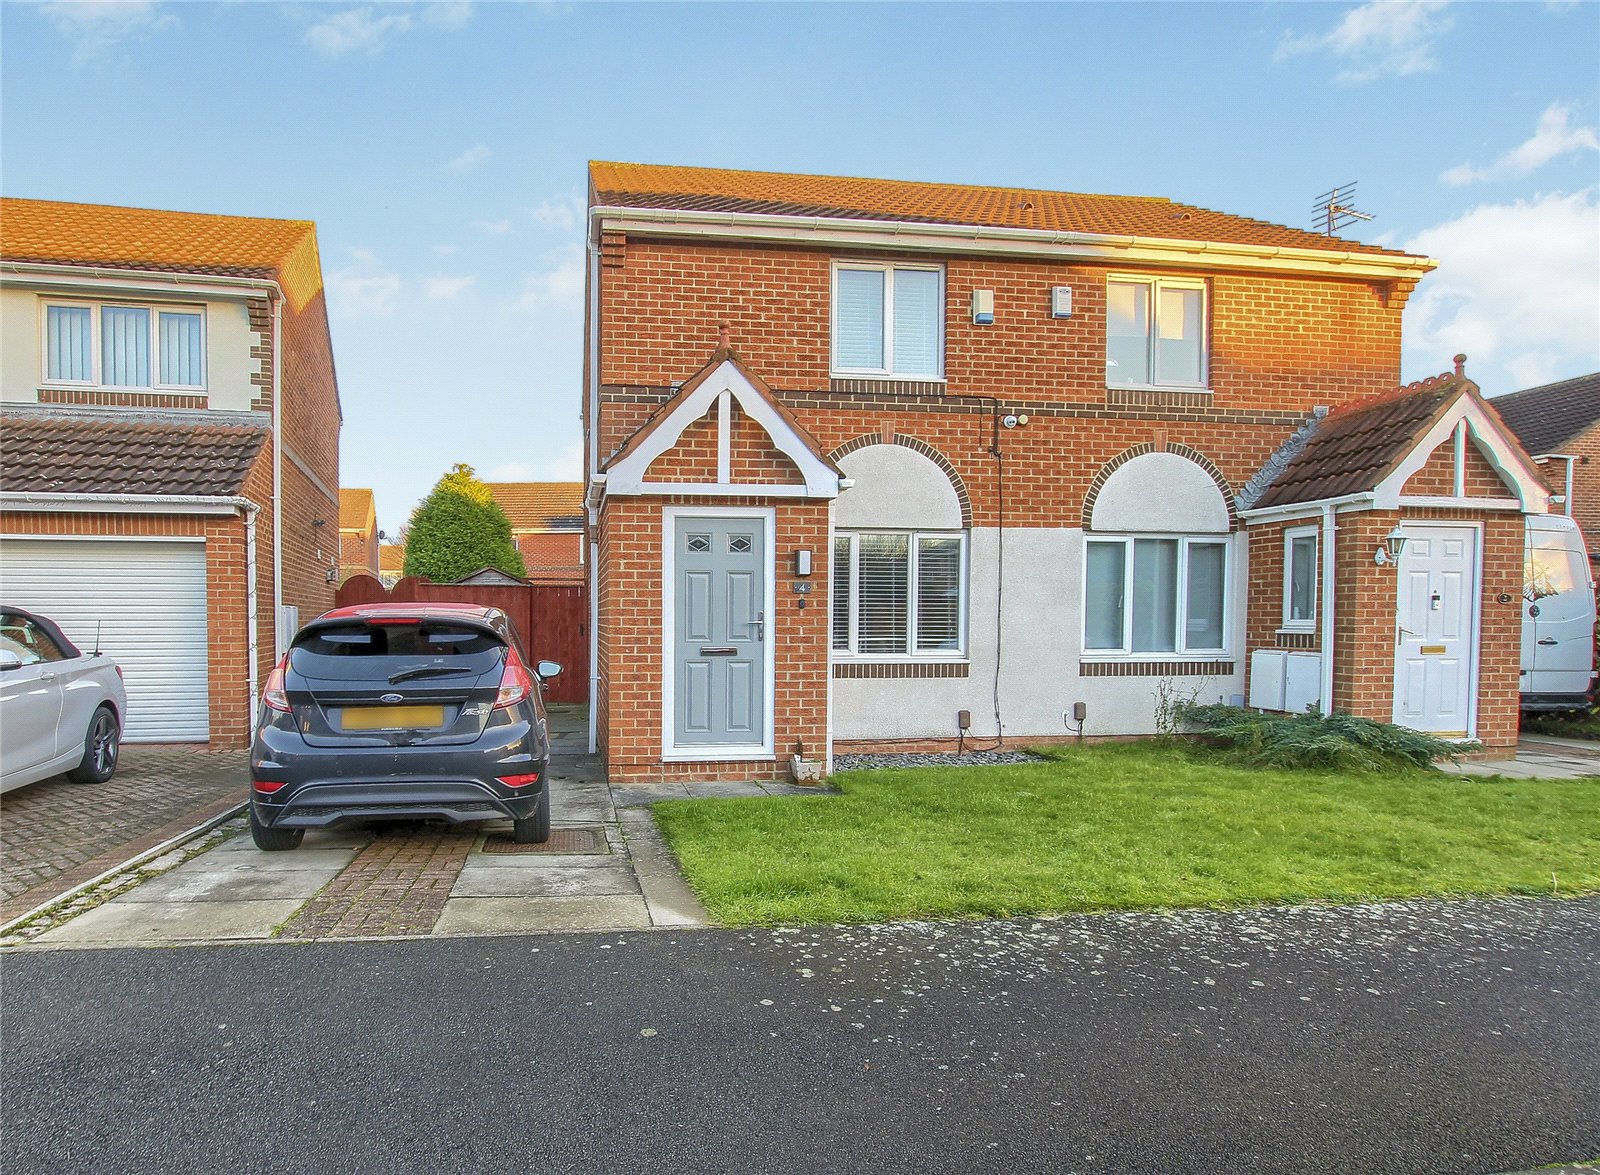 2 bed  for sale in Constable Grove, Wolviston Grange  - Property Image 1